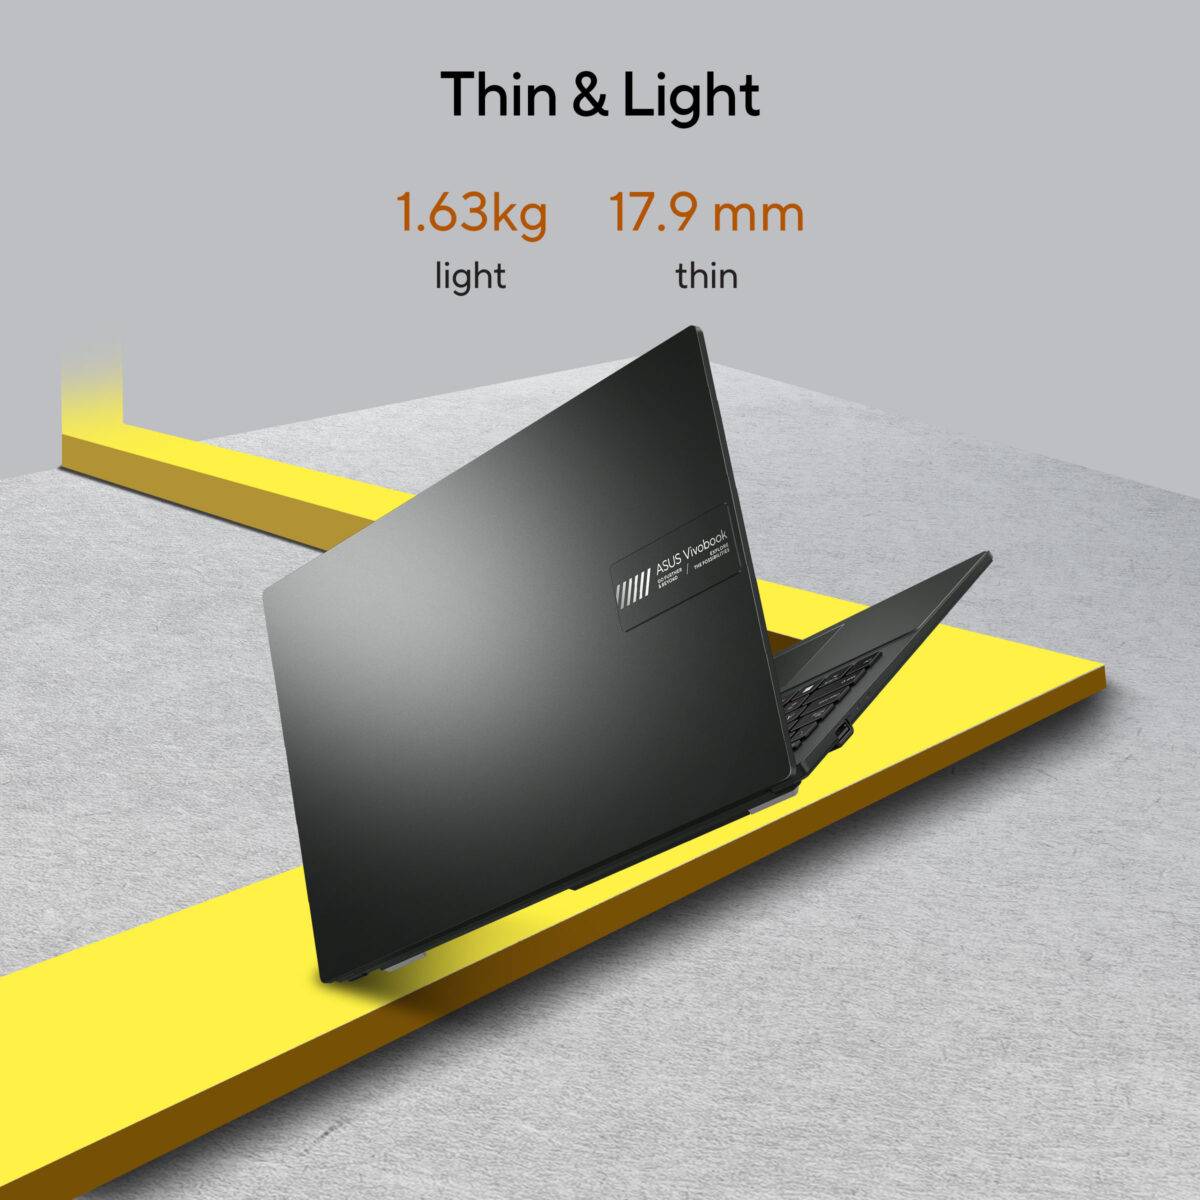 17.9 mm and 1.63 kg thin and light design for easy one-handed carrying.